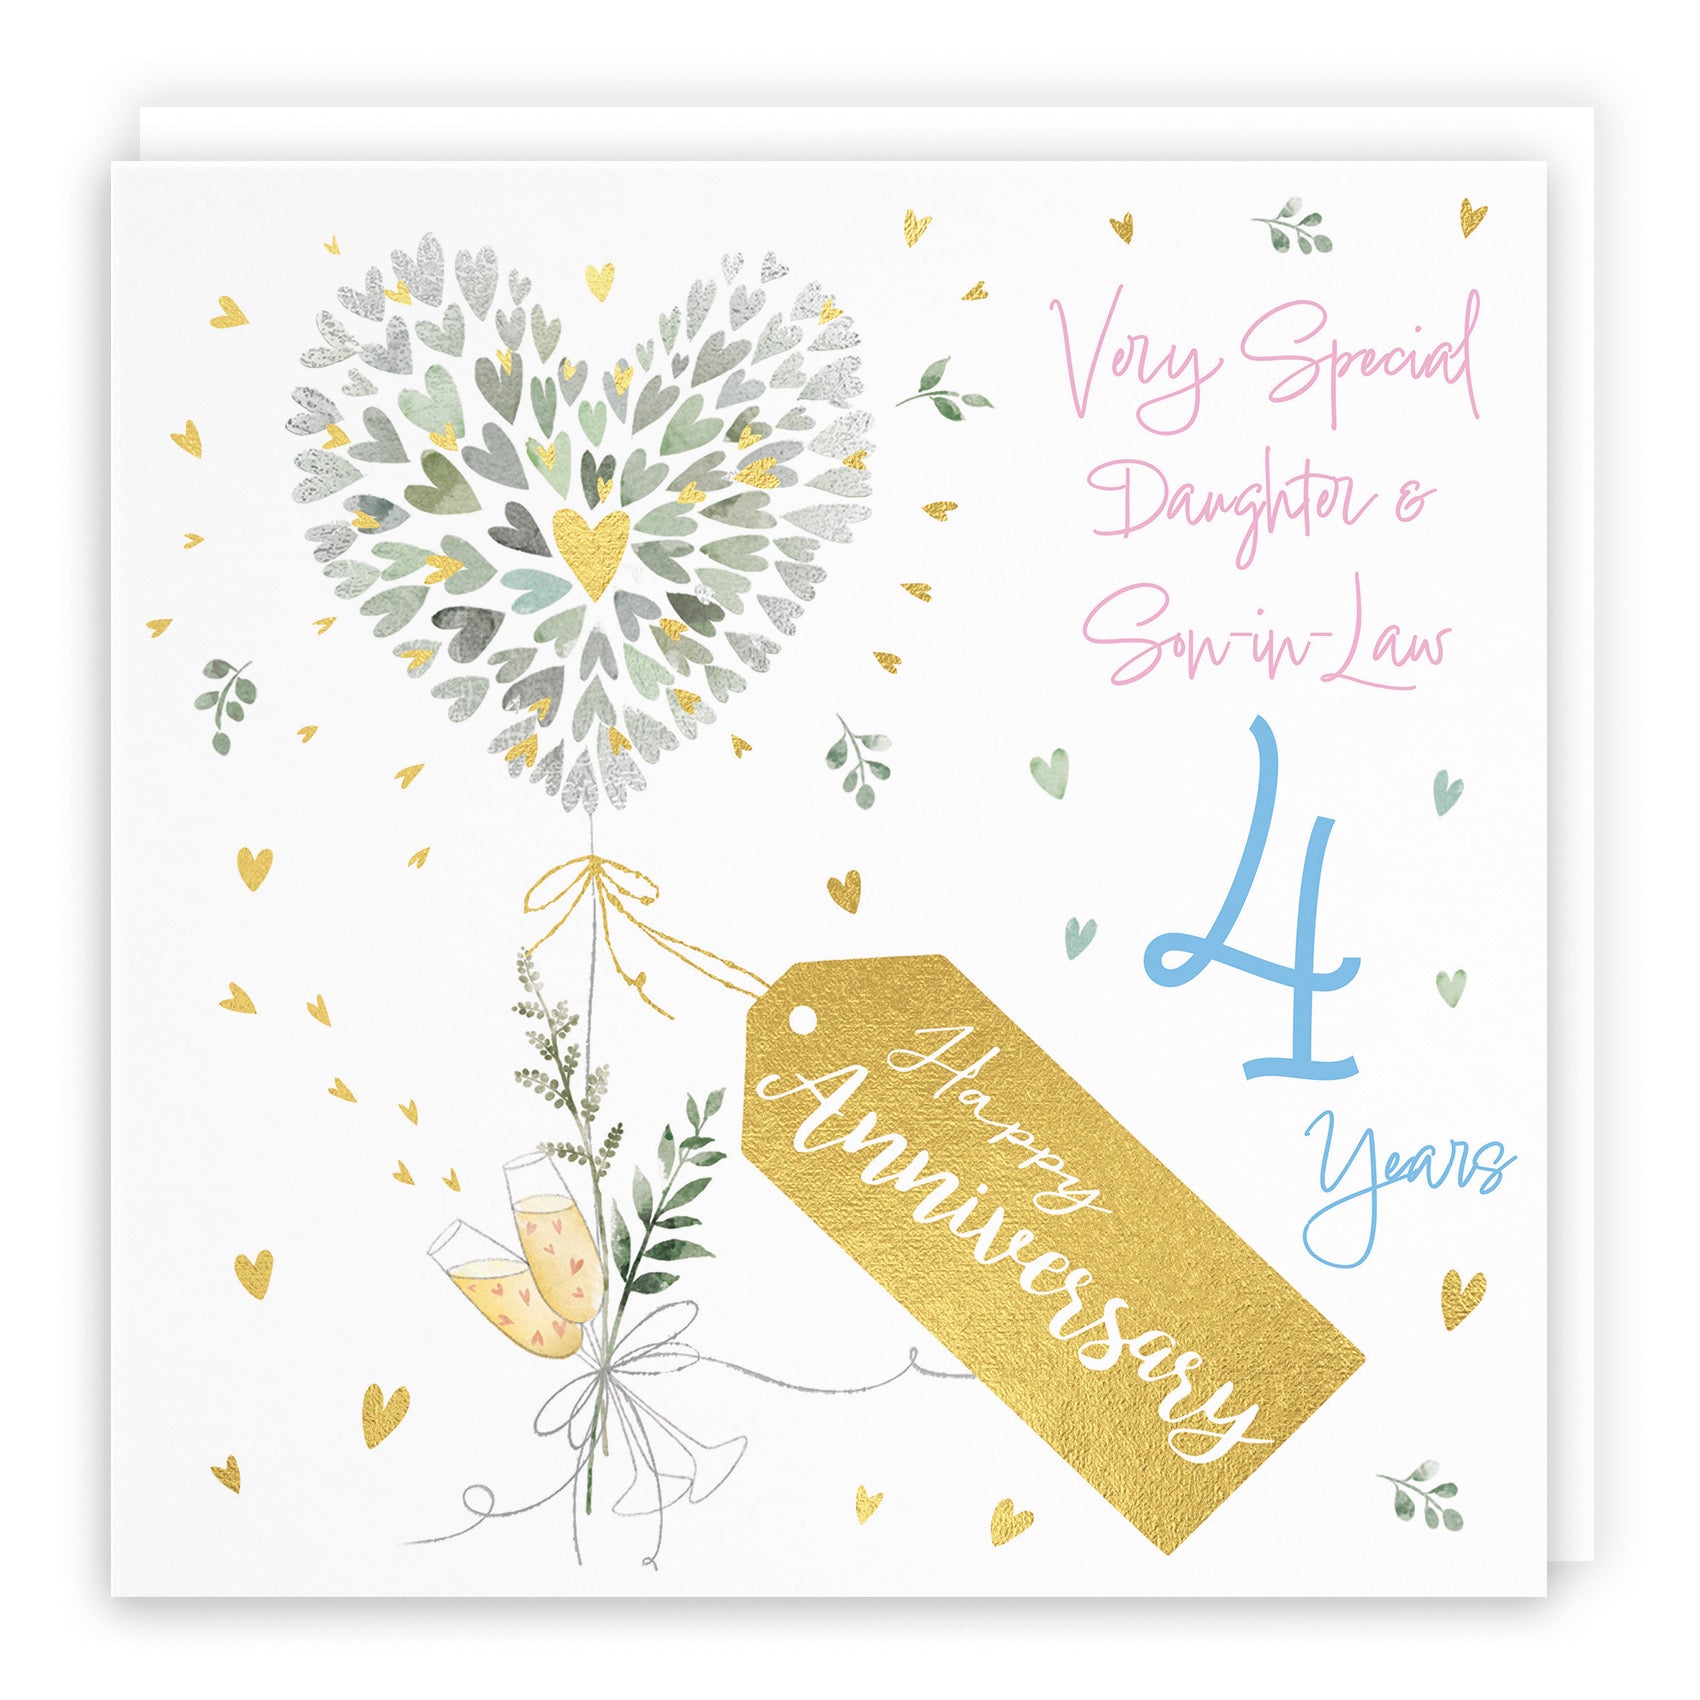 Daughter And Son-in-Law 4th Anniversary Card Contemporary Hearts Milo's Gallery - Default Title (B0CKJ644V1)